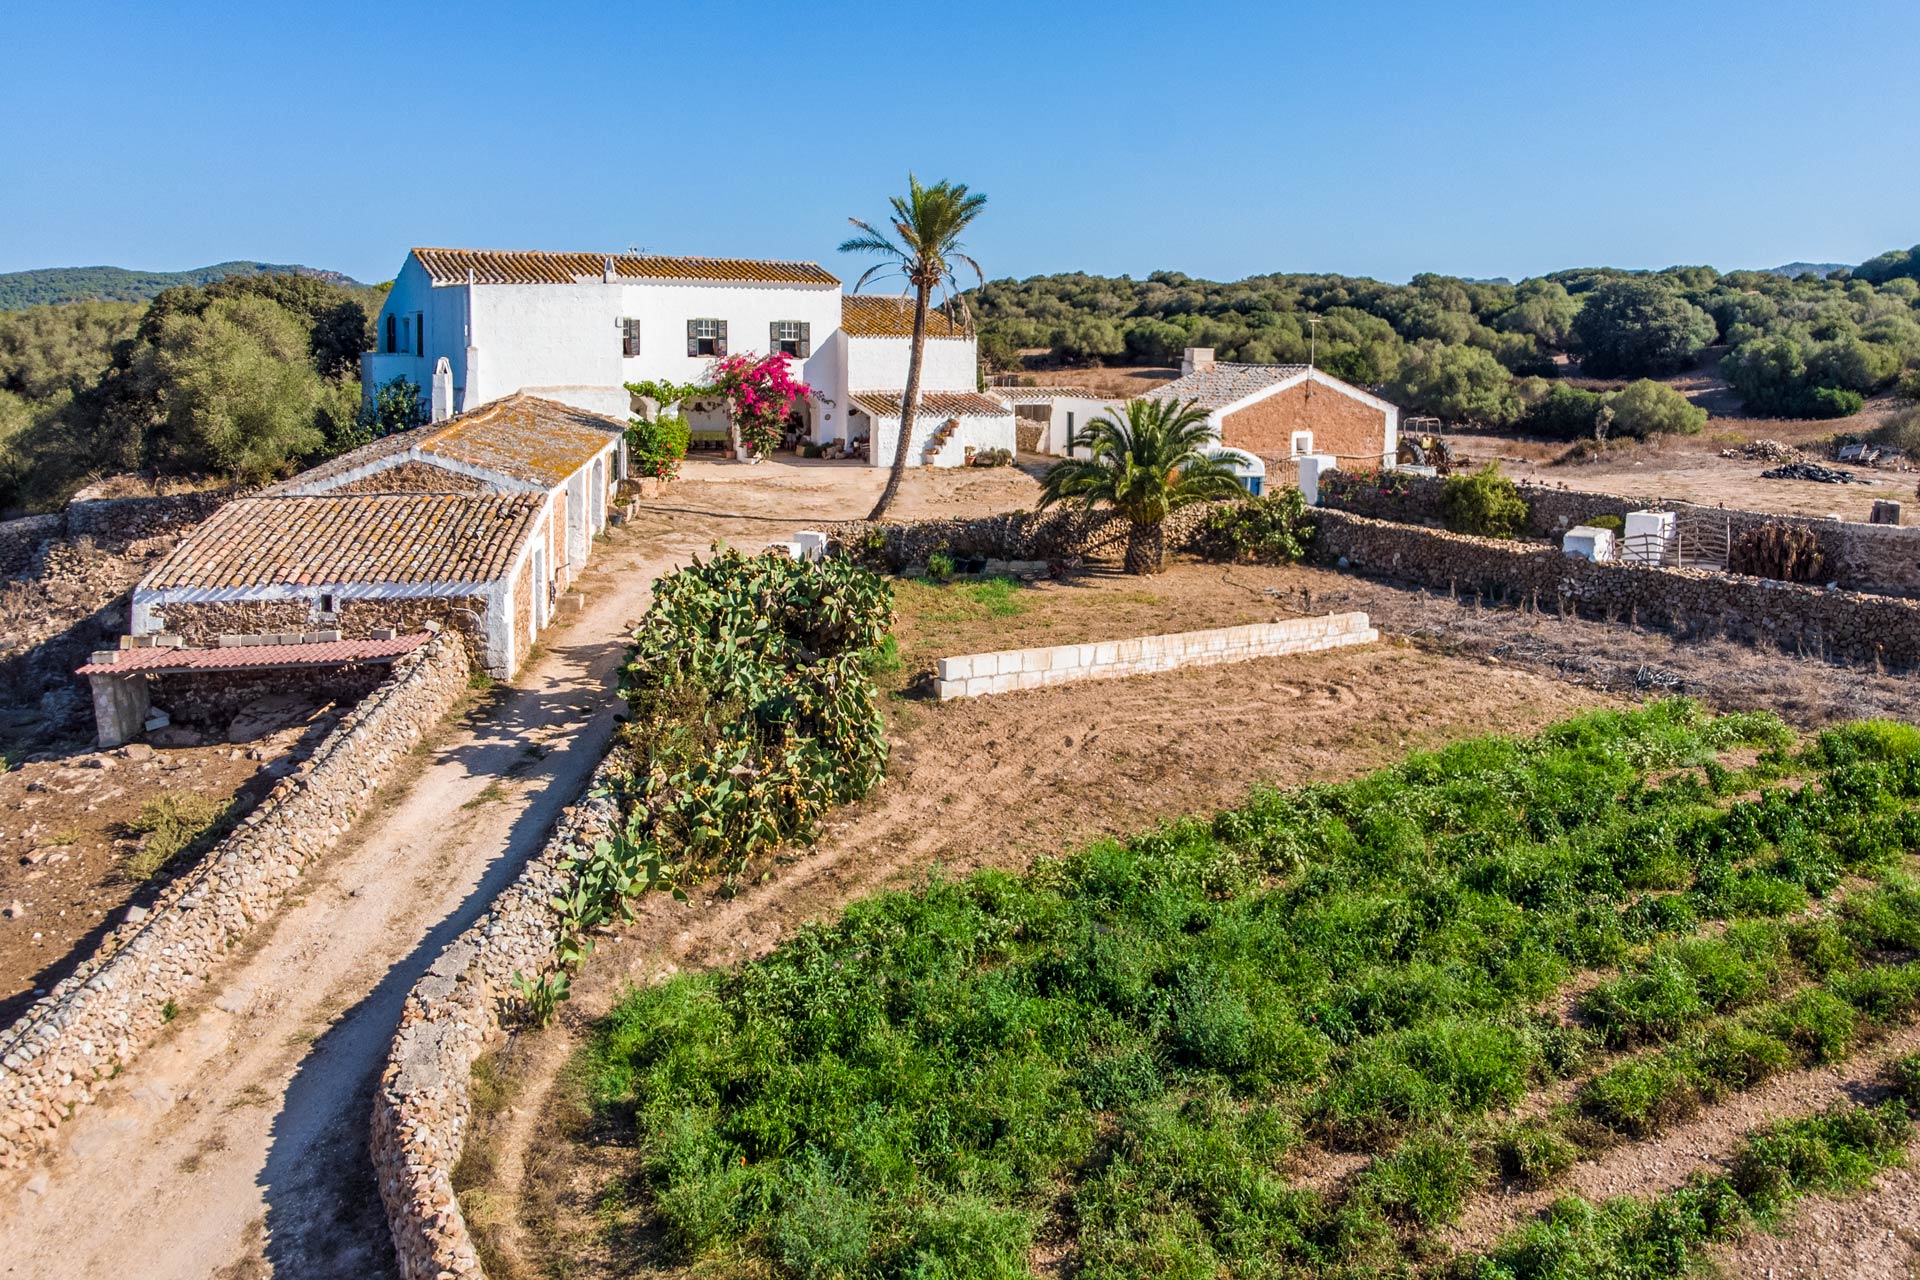 What were the luxury houses like in Menorca 200 years ago?